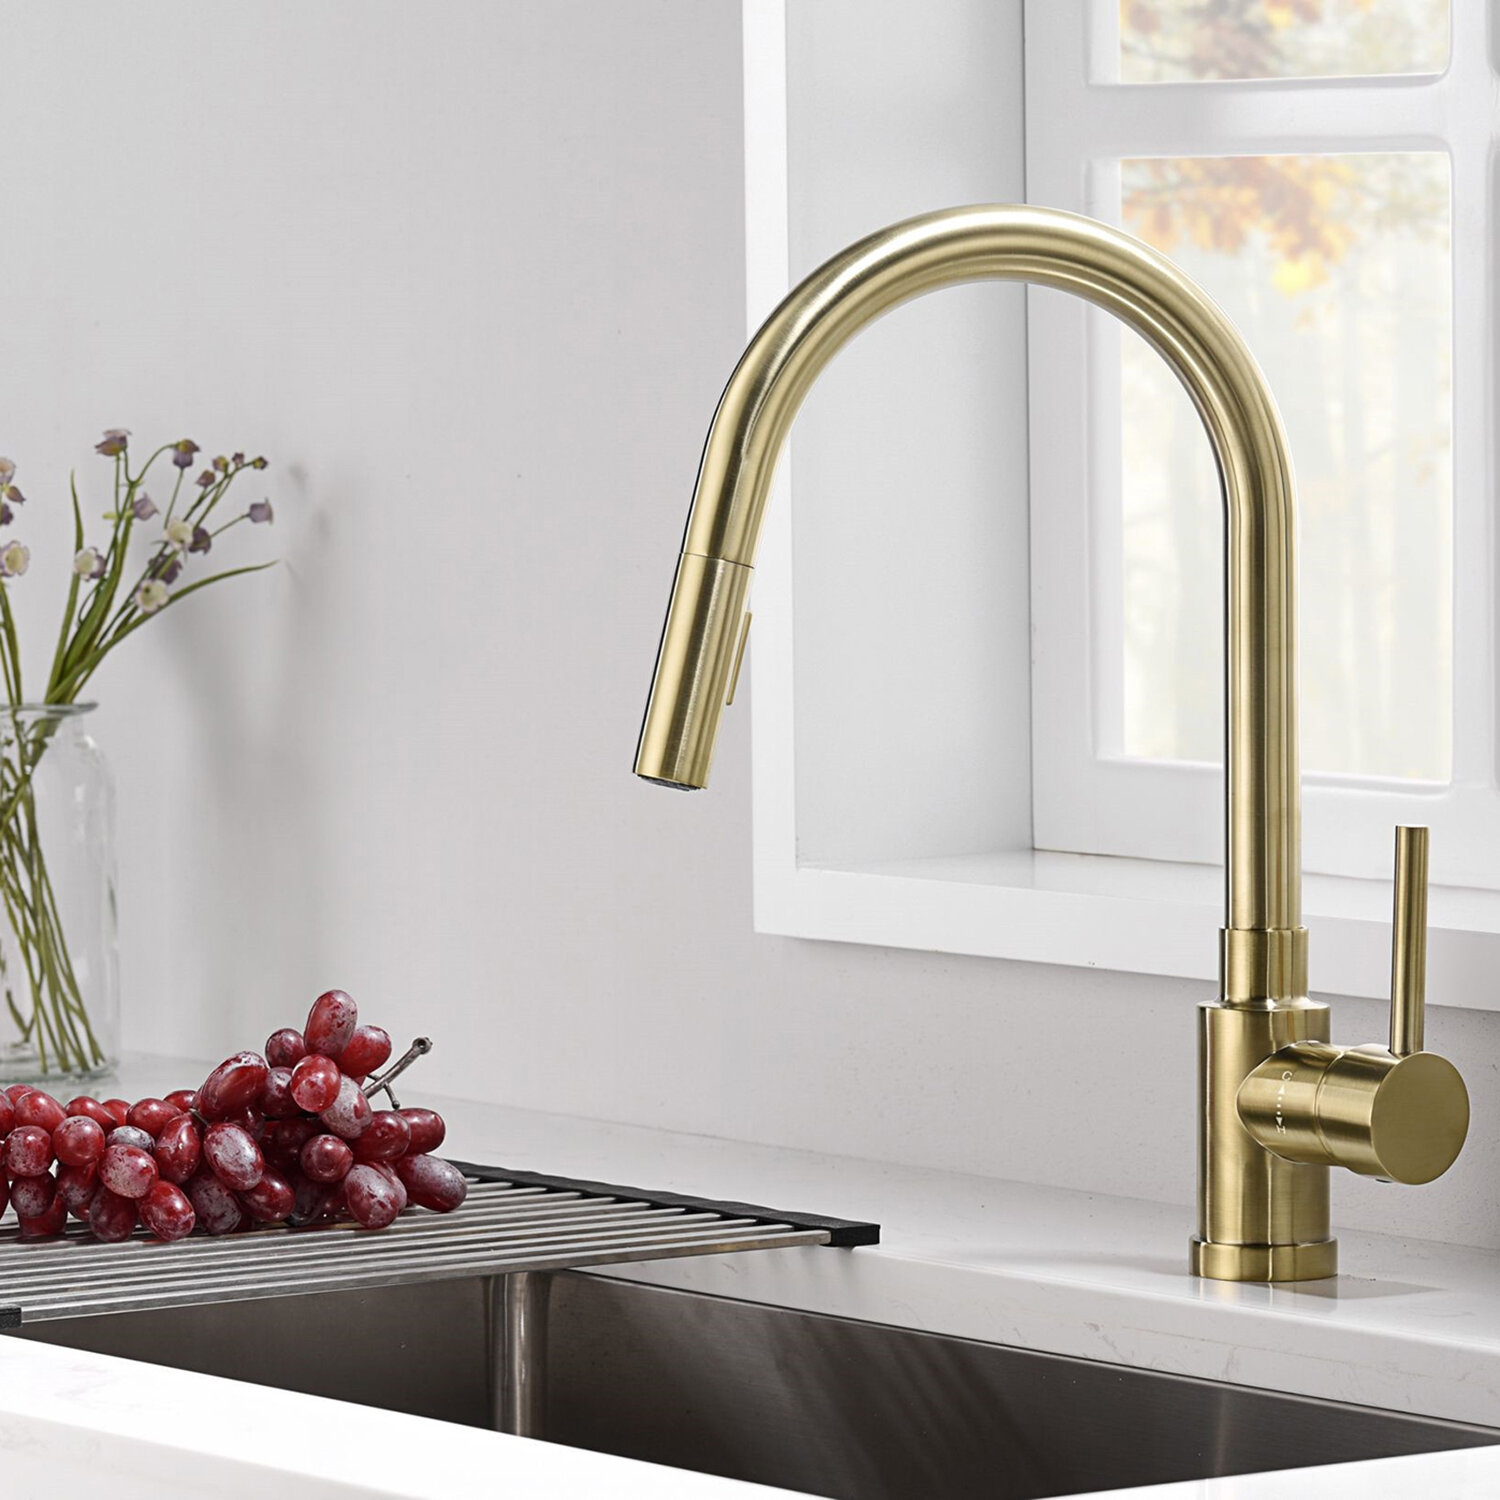 Oakland Kitchen Faucet with Pull Down Sprayer Brass Kitchen Faucet Single Handle Brushed Nickel Kitchen Faucet with Quick Hose Connector Spot Free Resist Rust Drip KSK1114 Brushed Nickel 